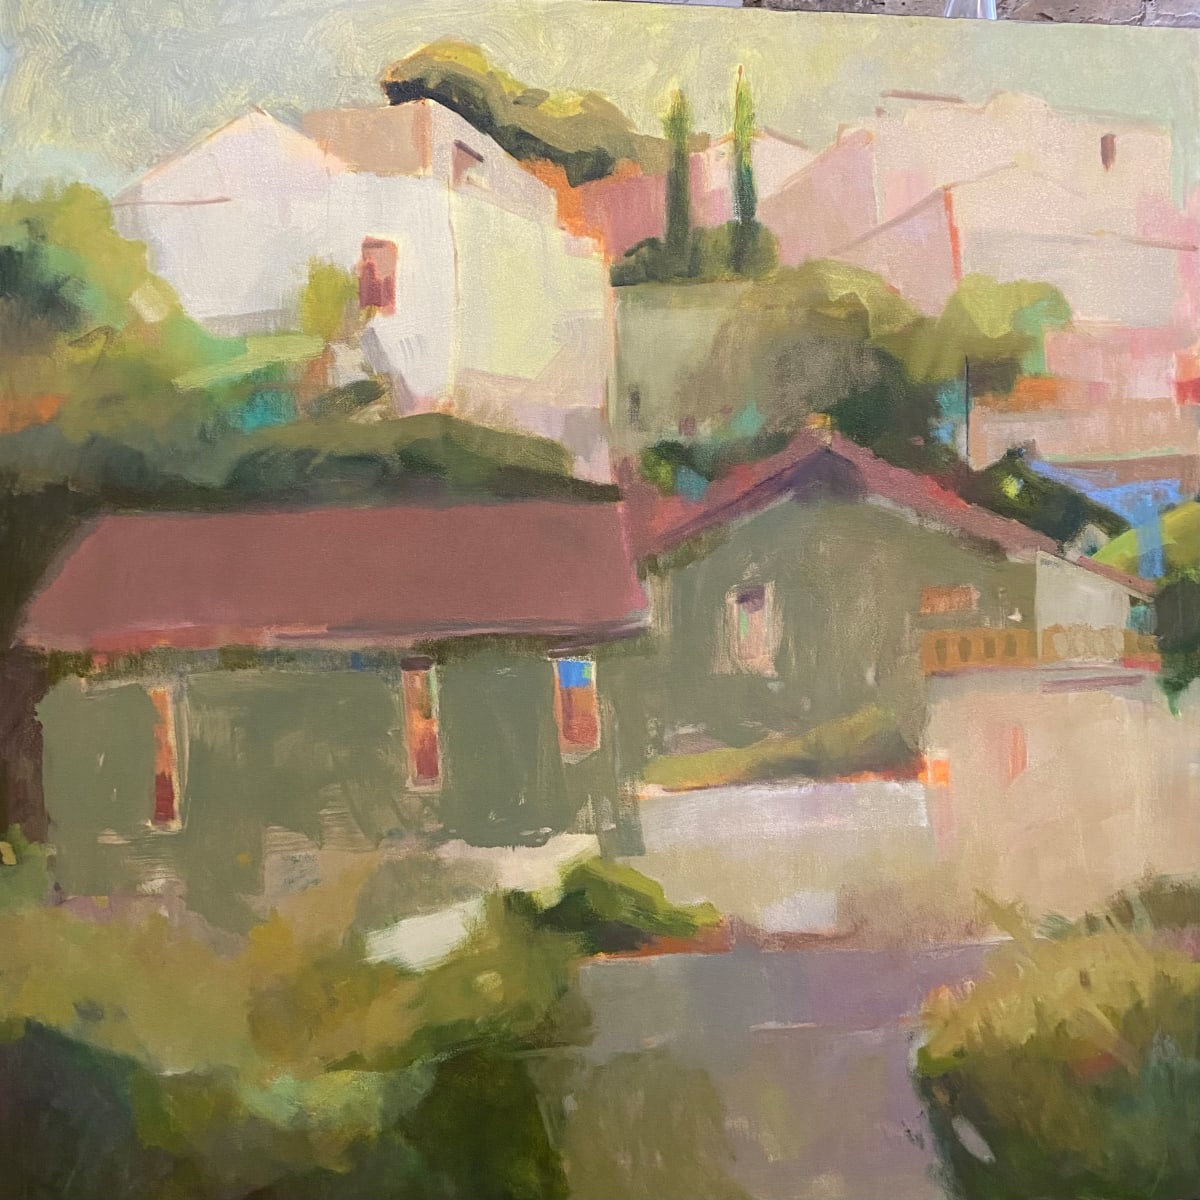 Provence Morning by Jean Lee Cauthen  Image: Unframed
